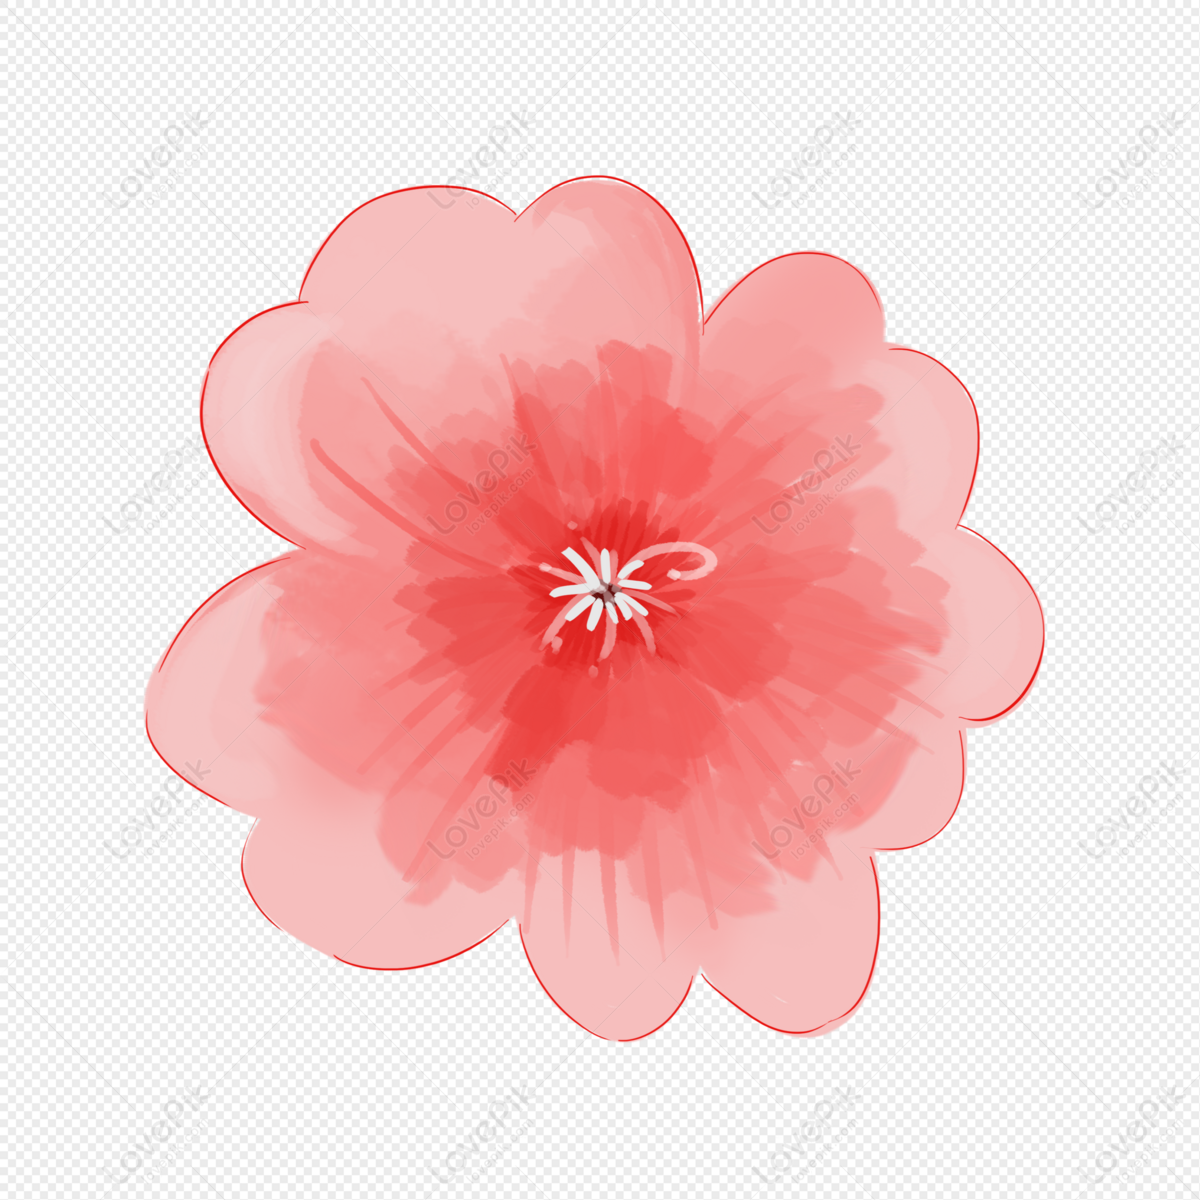 Cherry Blossoms PNG Images With Transparent Background | Free ...